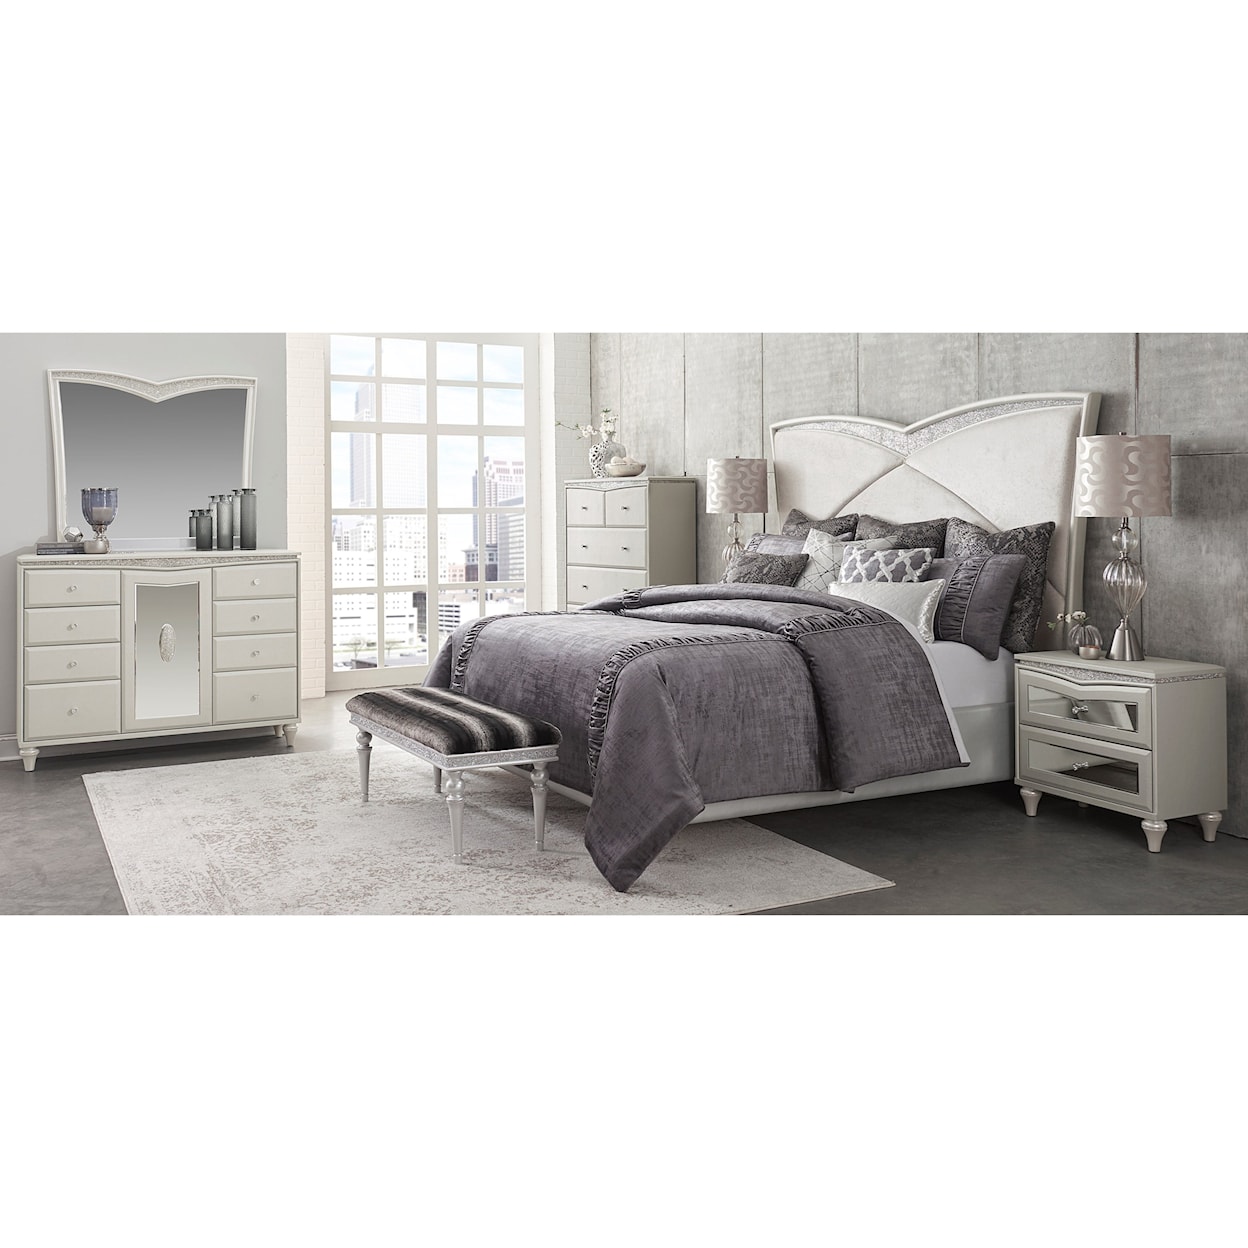 Michael Amini Melrose Plaza Queen Upholstered Bed